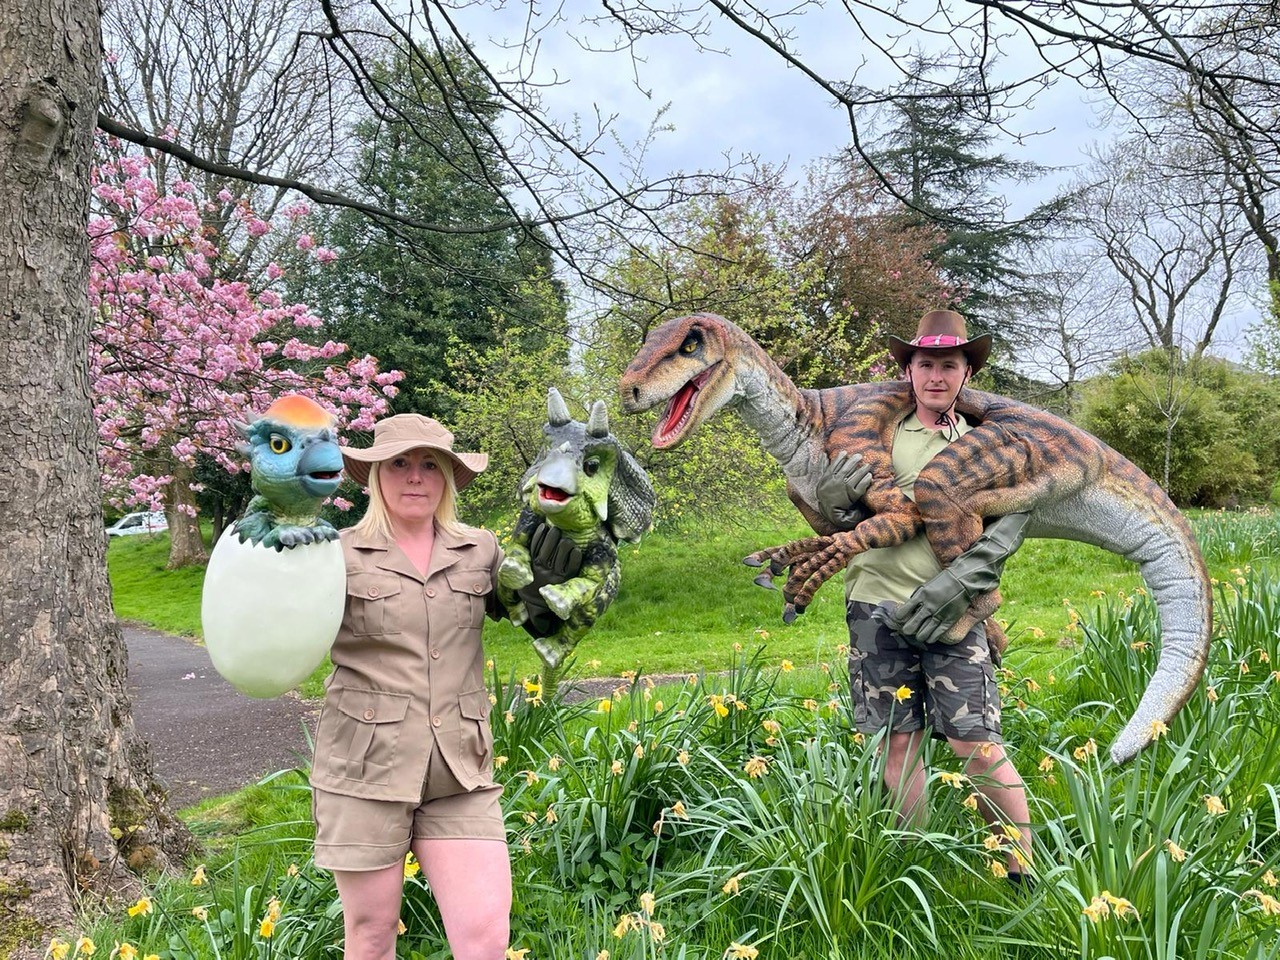 Dinosaurs are coming to Burnley